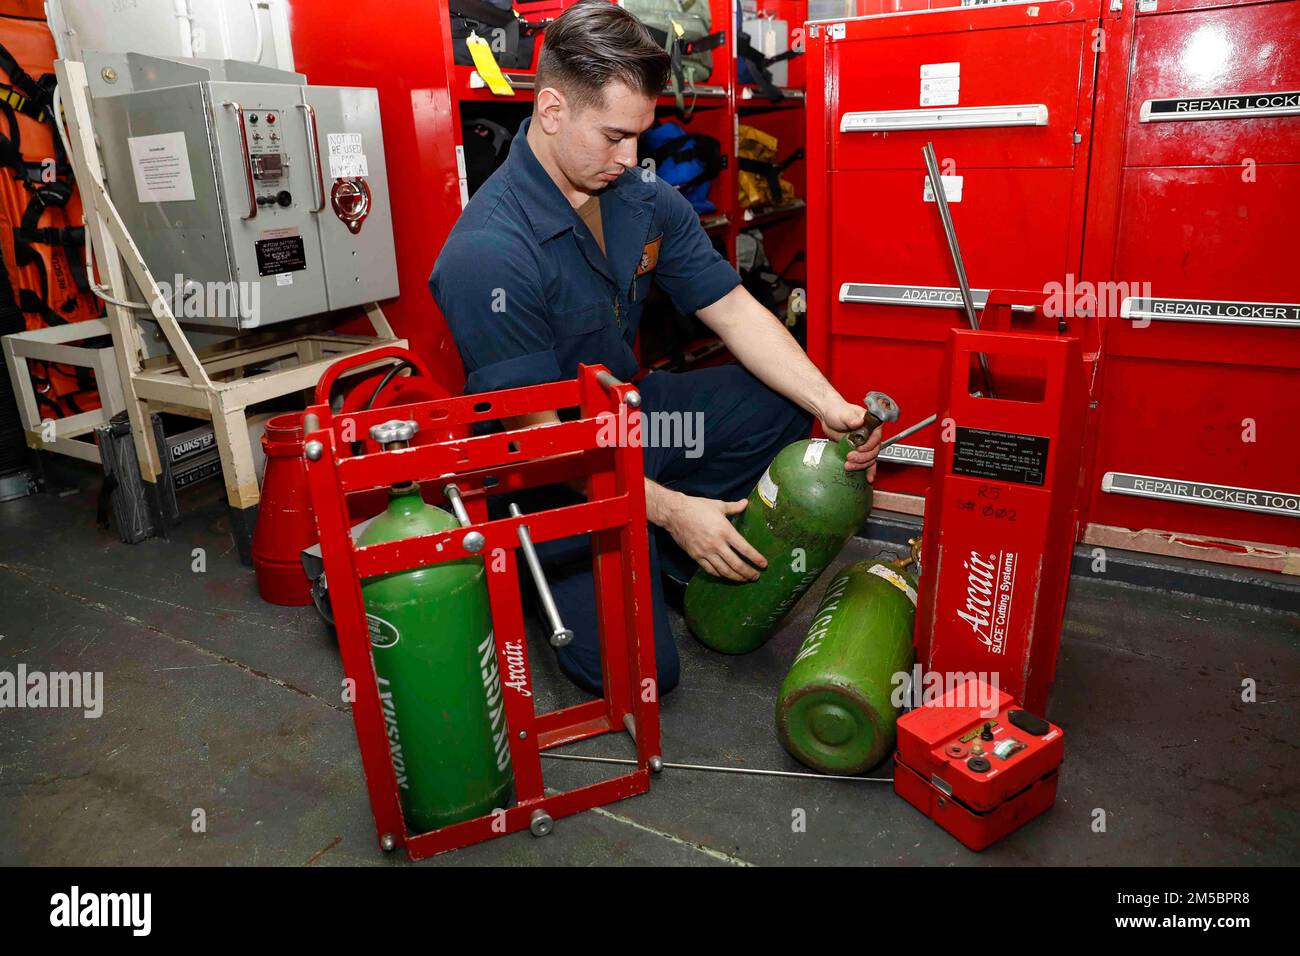 PHILIPPINE SEA (Feb. 24, 2022) Damage Controlman Fireman Pedro Lozano, from San Diego, inspects a portable exothermic cutting unit (PECU) in a repair locker aboard the Nimitz-class aircraft carrier USS Abraham Lincoln (CVN 72). Abraham Lincoln Strike Group is on a scheduled deployment in the U.S. 7th Fleet area of operations to enhance interoperability through alliances and partnerships while serving as a ready-response force in support of a free and open Indo-Pacific region. Stock Photo